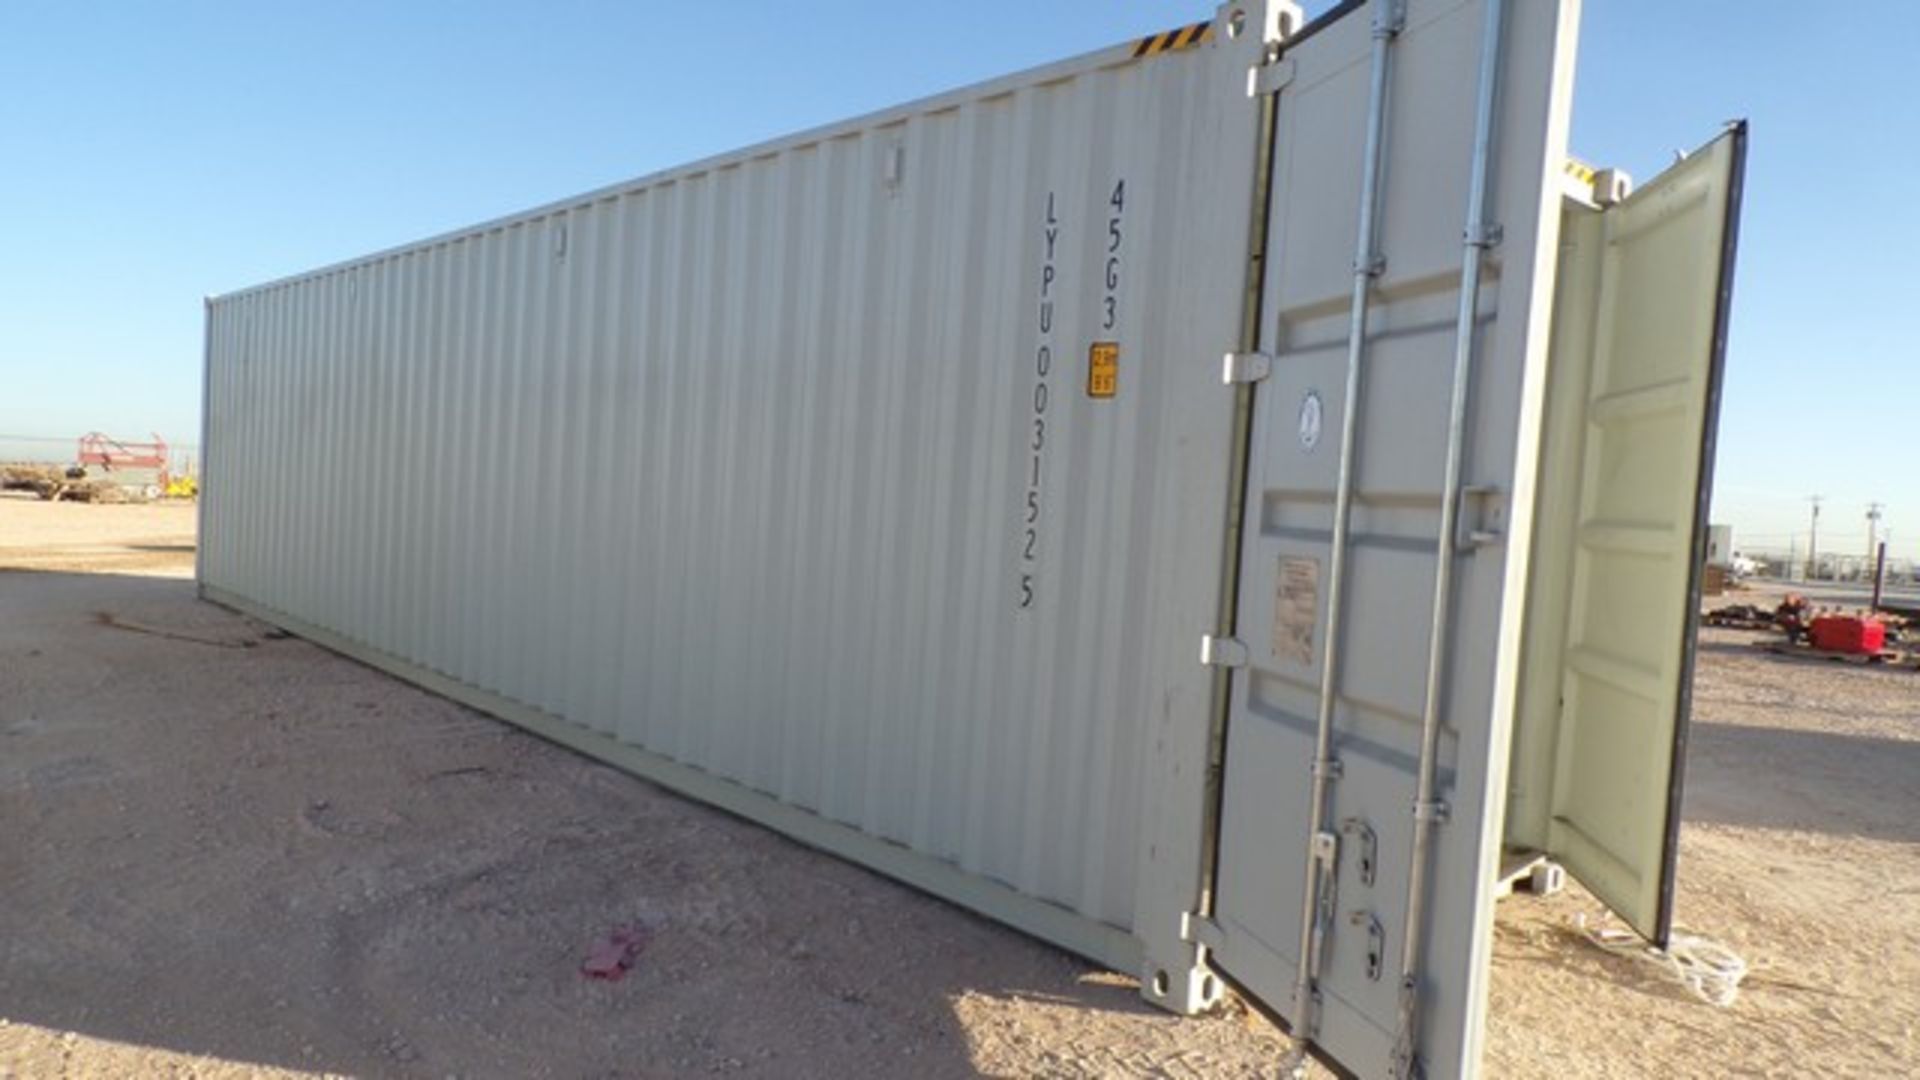 Located in YARD 1 - Midland, TX 40' H CUB SEA CONTAINER W/ (4) SIDE OPEN DOORS, (1) END DOOR - Image 3 of 5